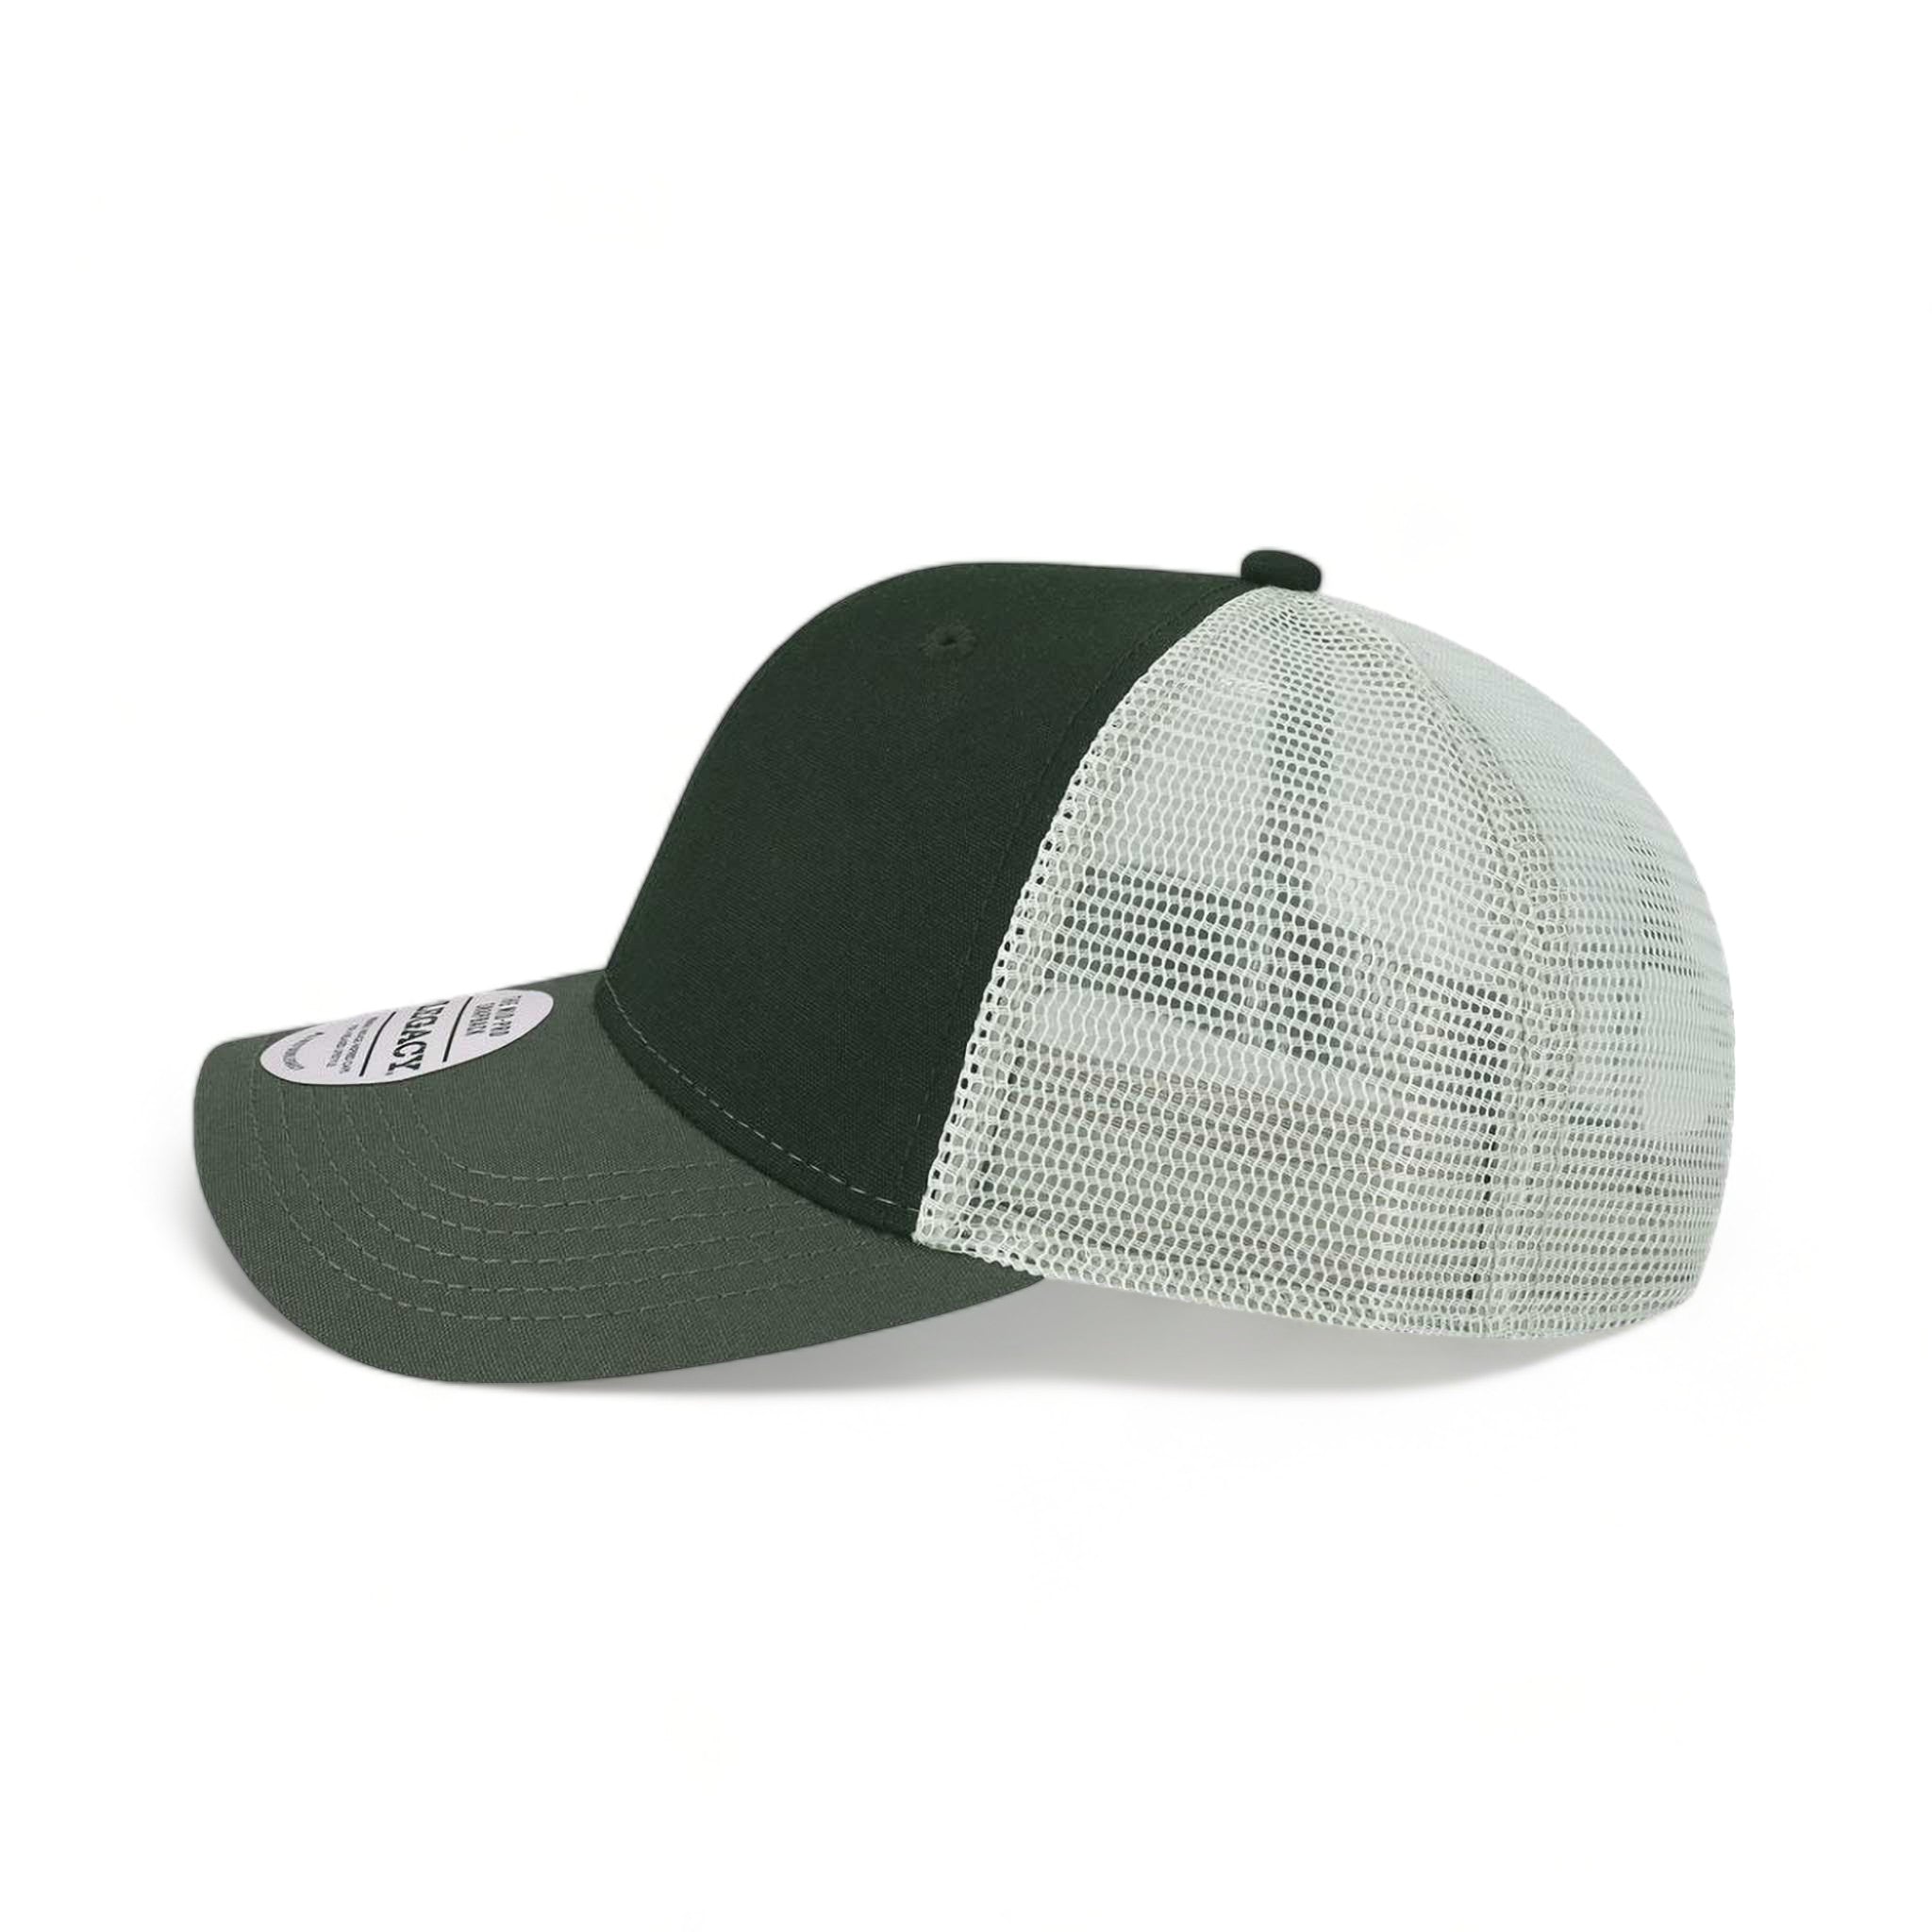 Side view of LEGACY MPS custom hat in black, dark grey and silver